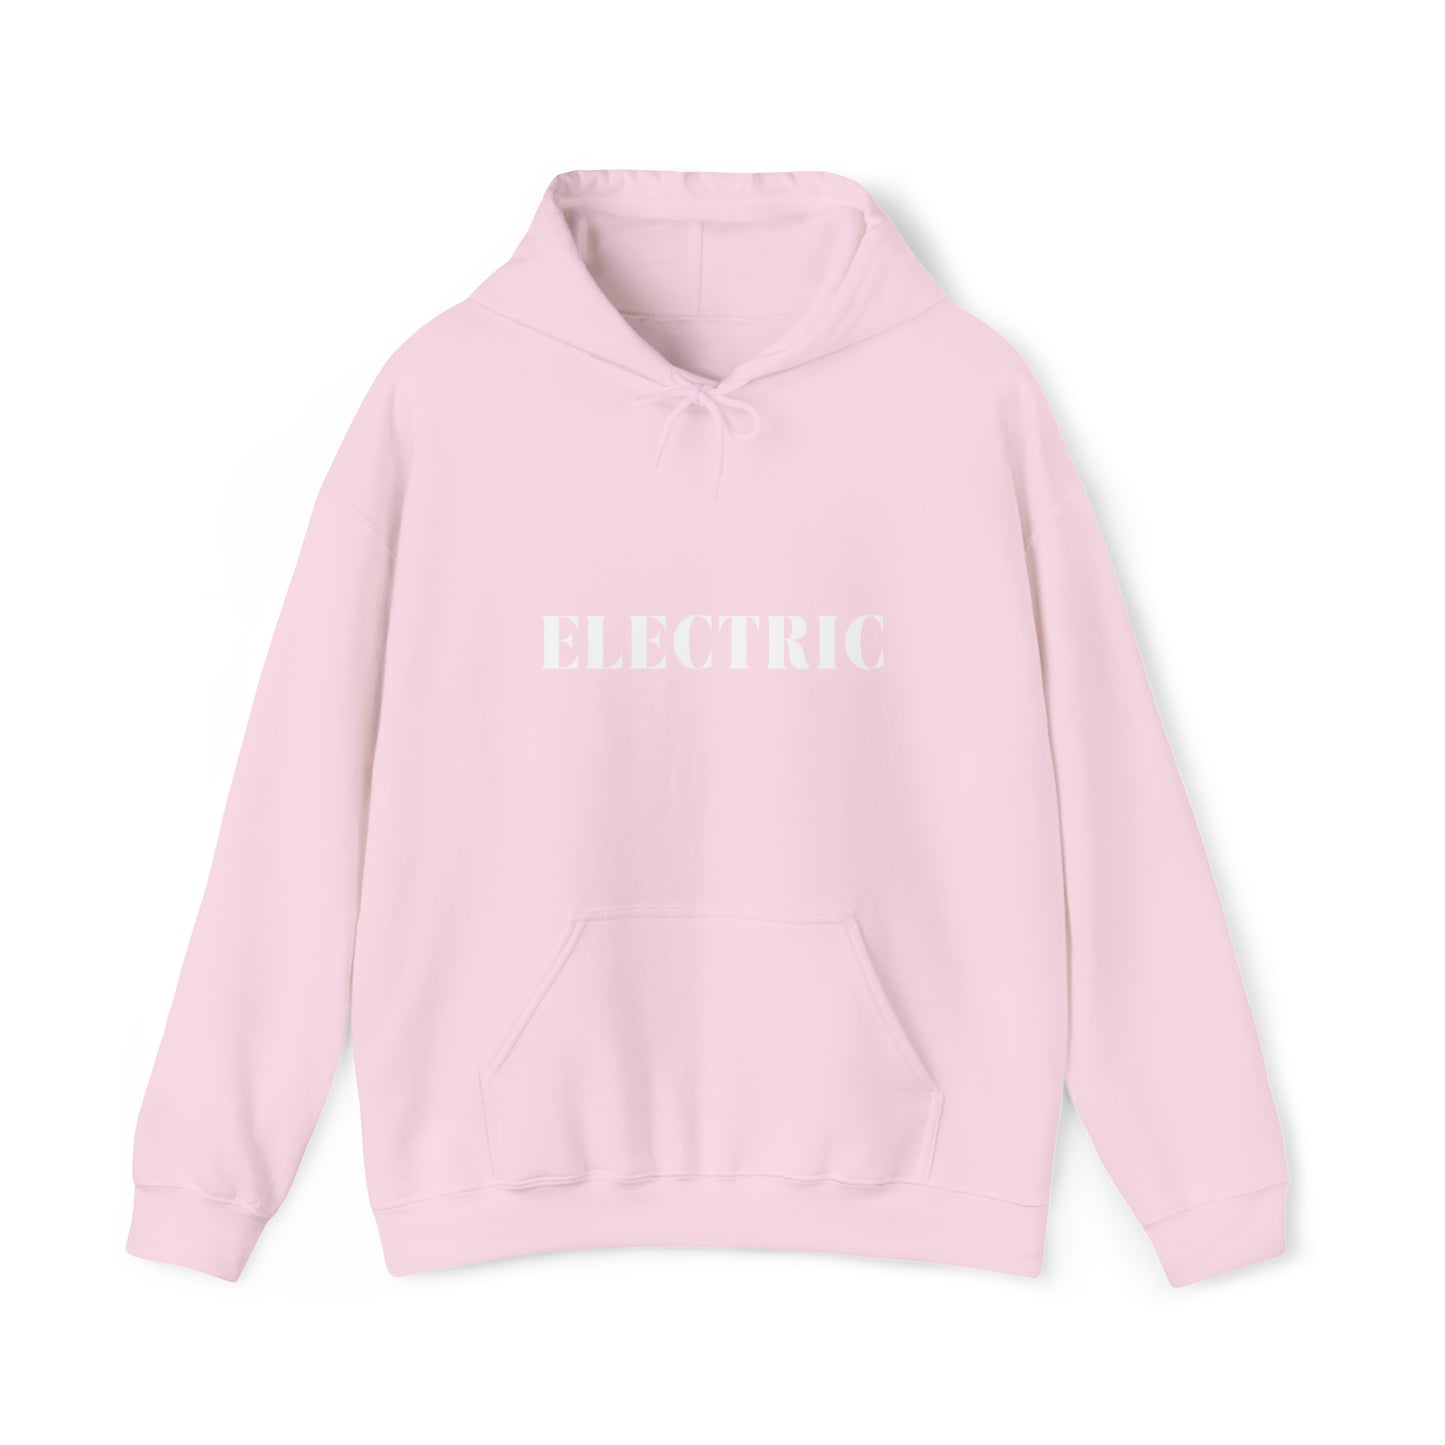 S Light Pink Electric Hoodie from HoodySZN.com